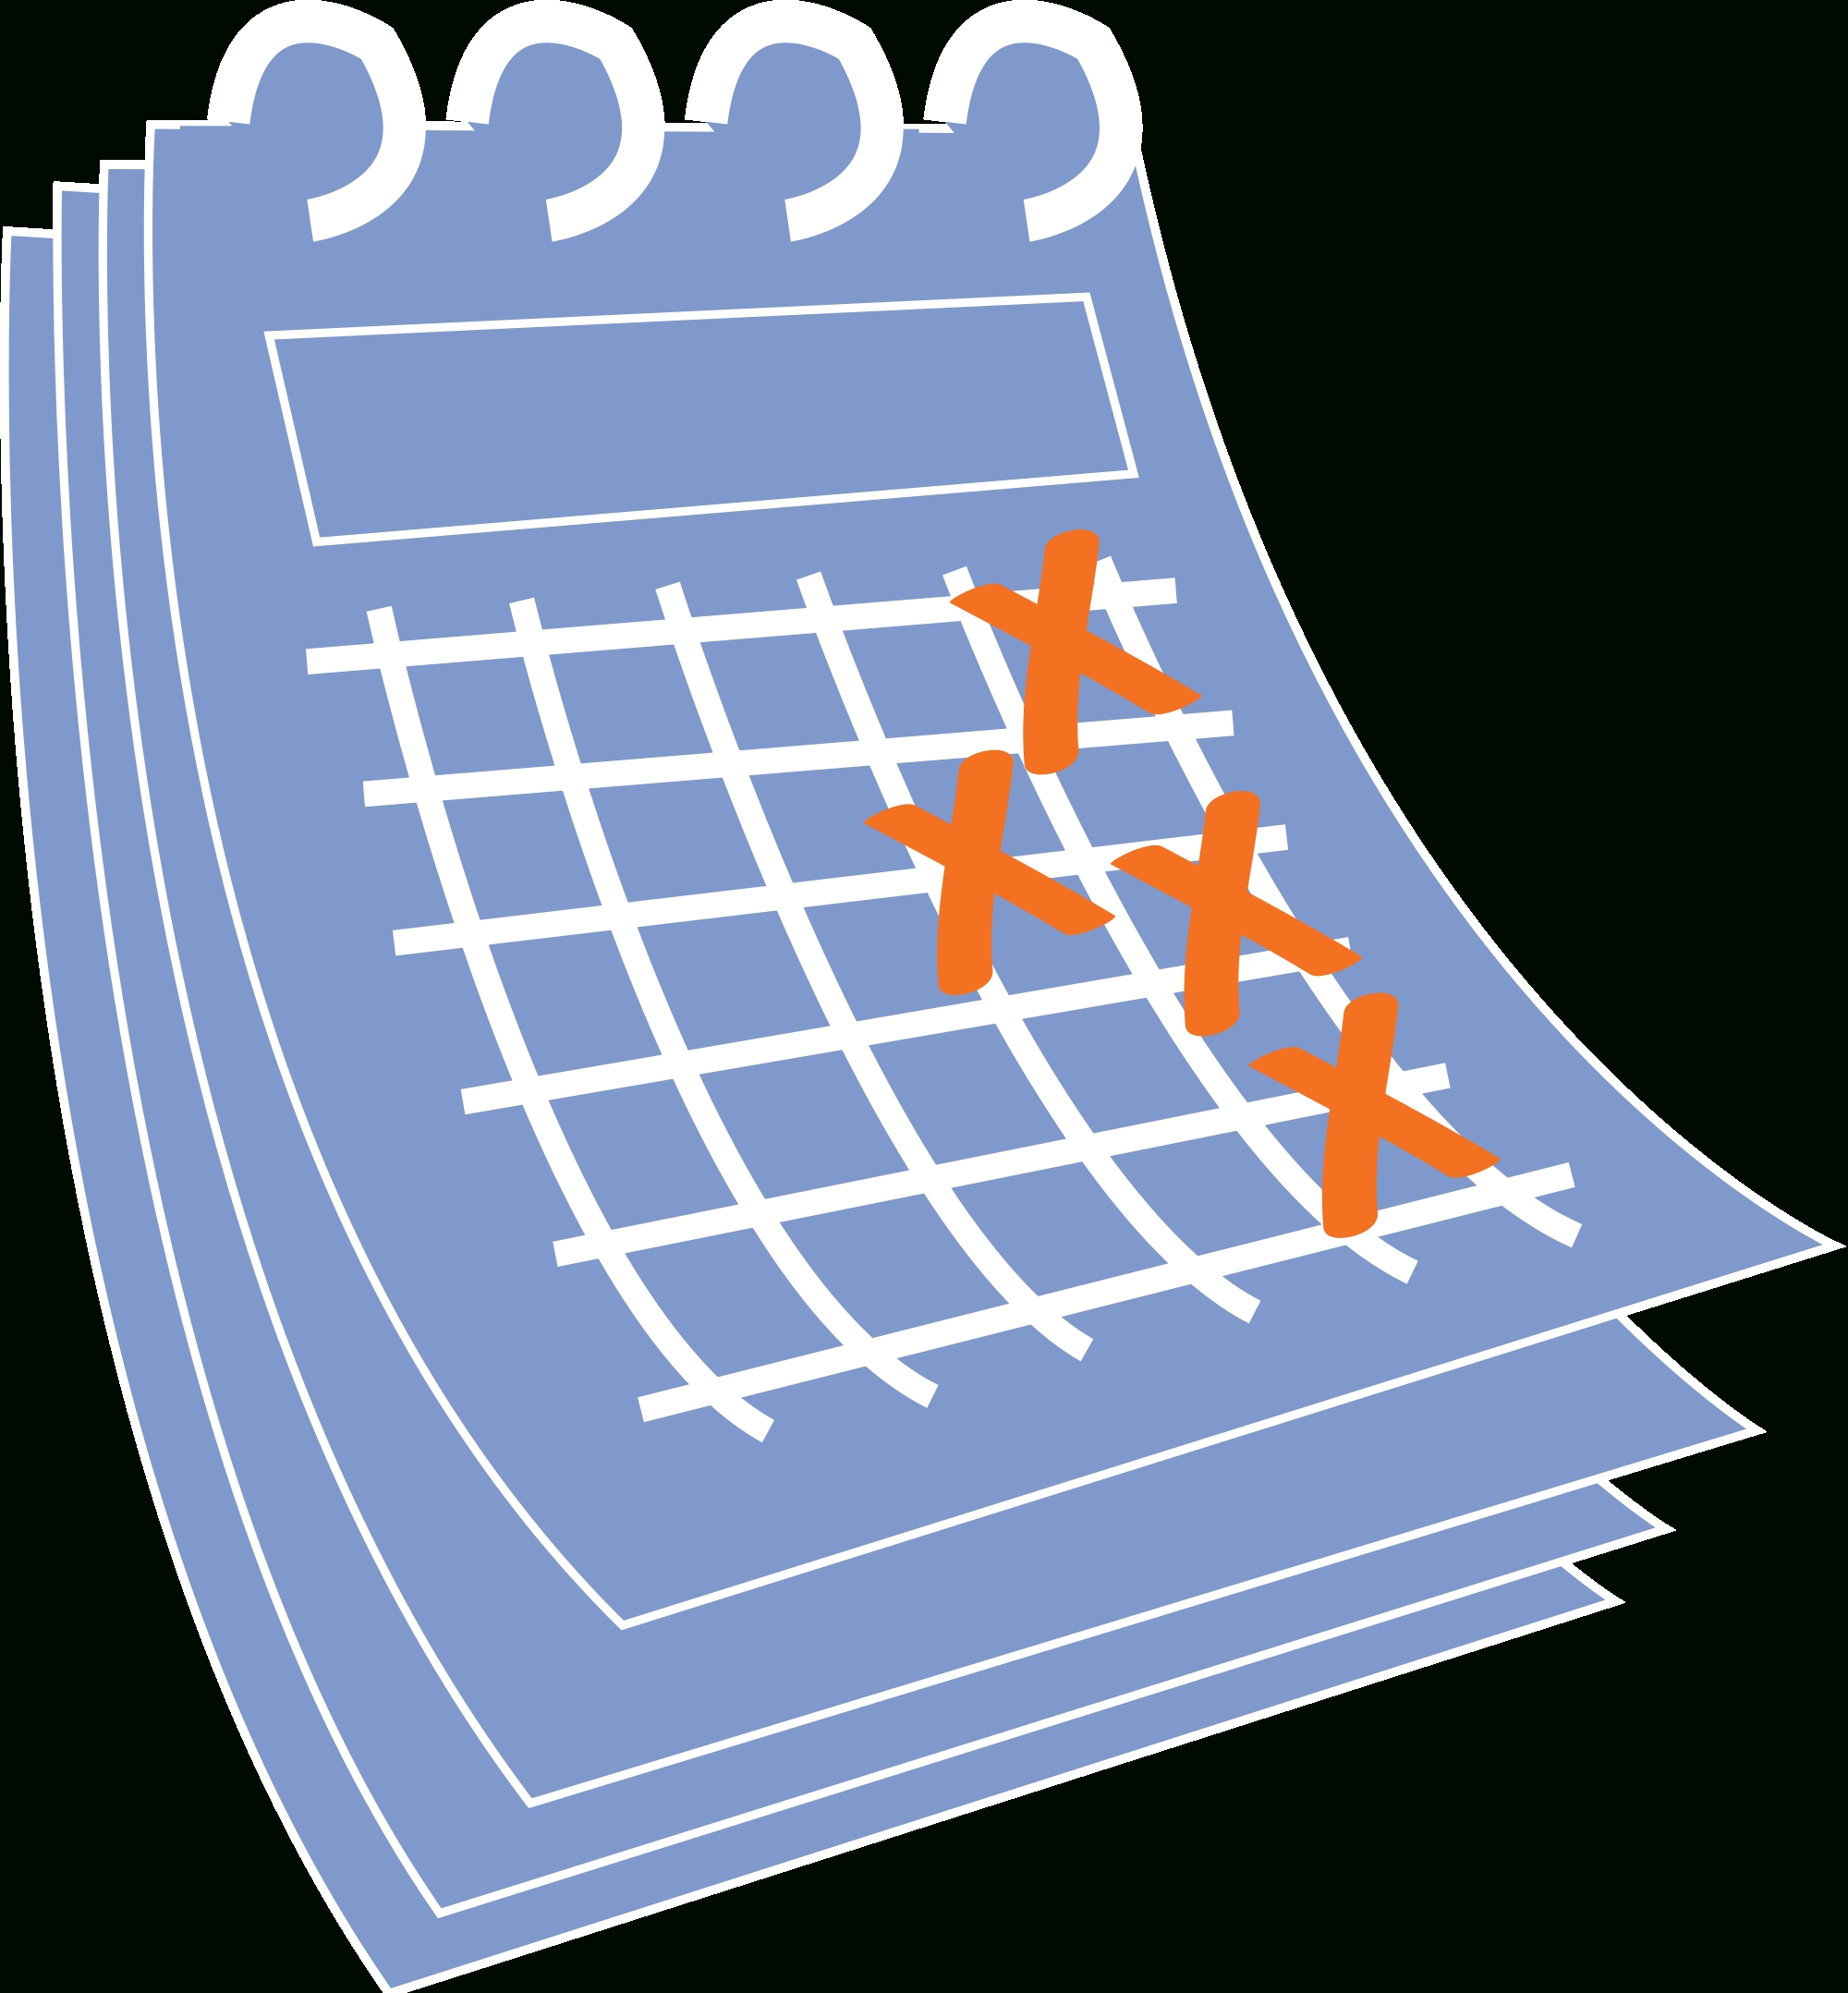 File:blue Calendar Icon With Dates Crossed Out.svg - Wikimedia Commons Calendar Icon Public Domain